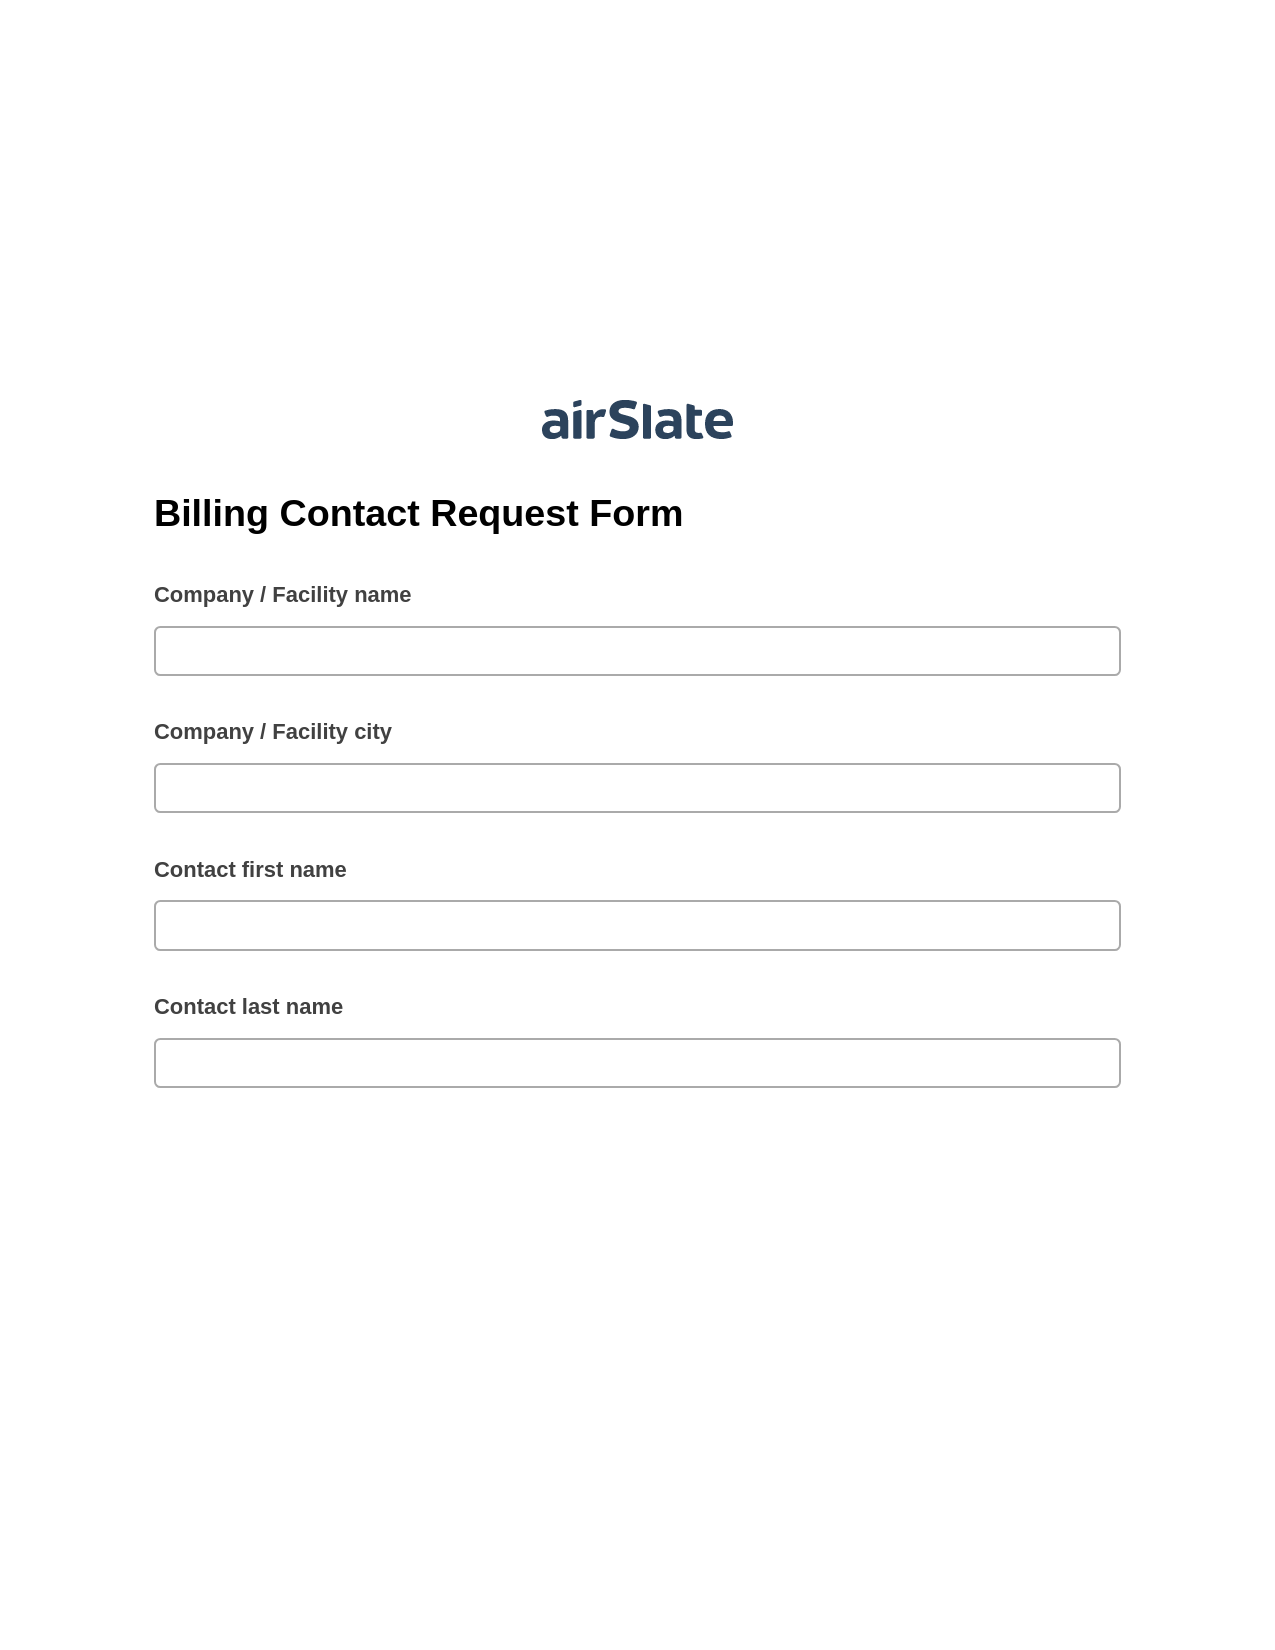 Billing Contact Request Form Pre-fill Slate from MS Dynamics 365 Records Bot, Pre-fill with Custom Data Bot, Google Drive Bot